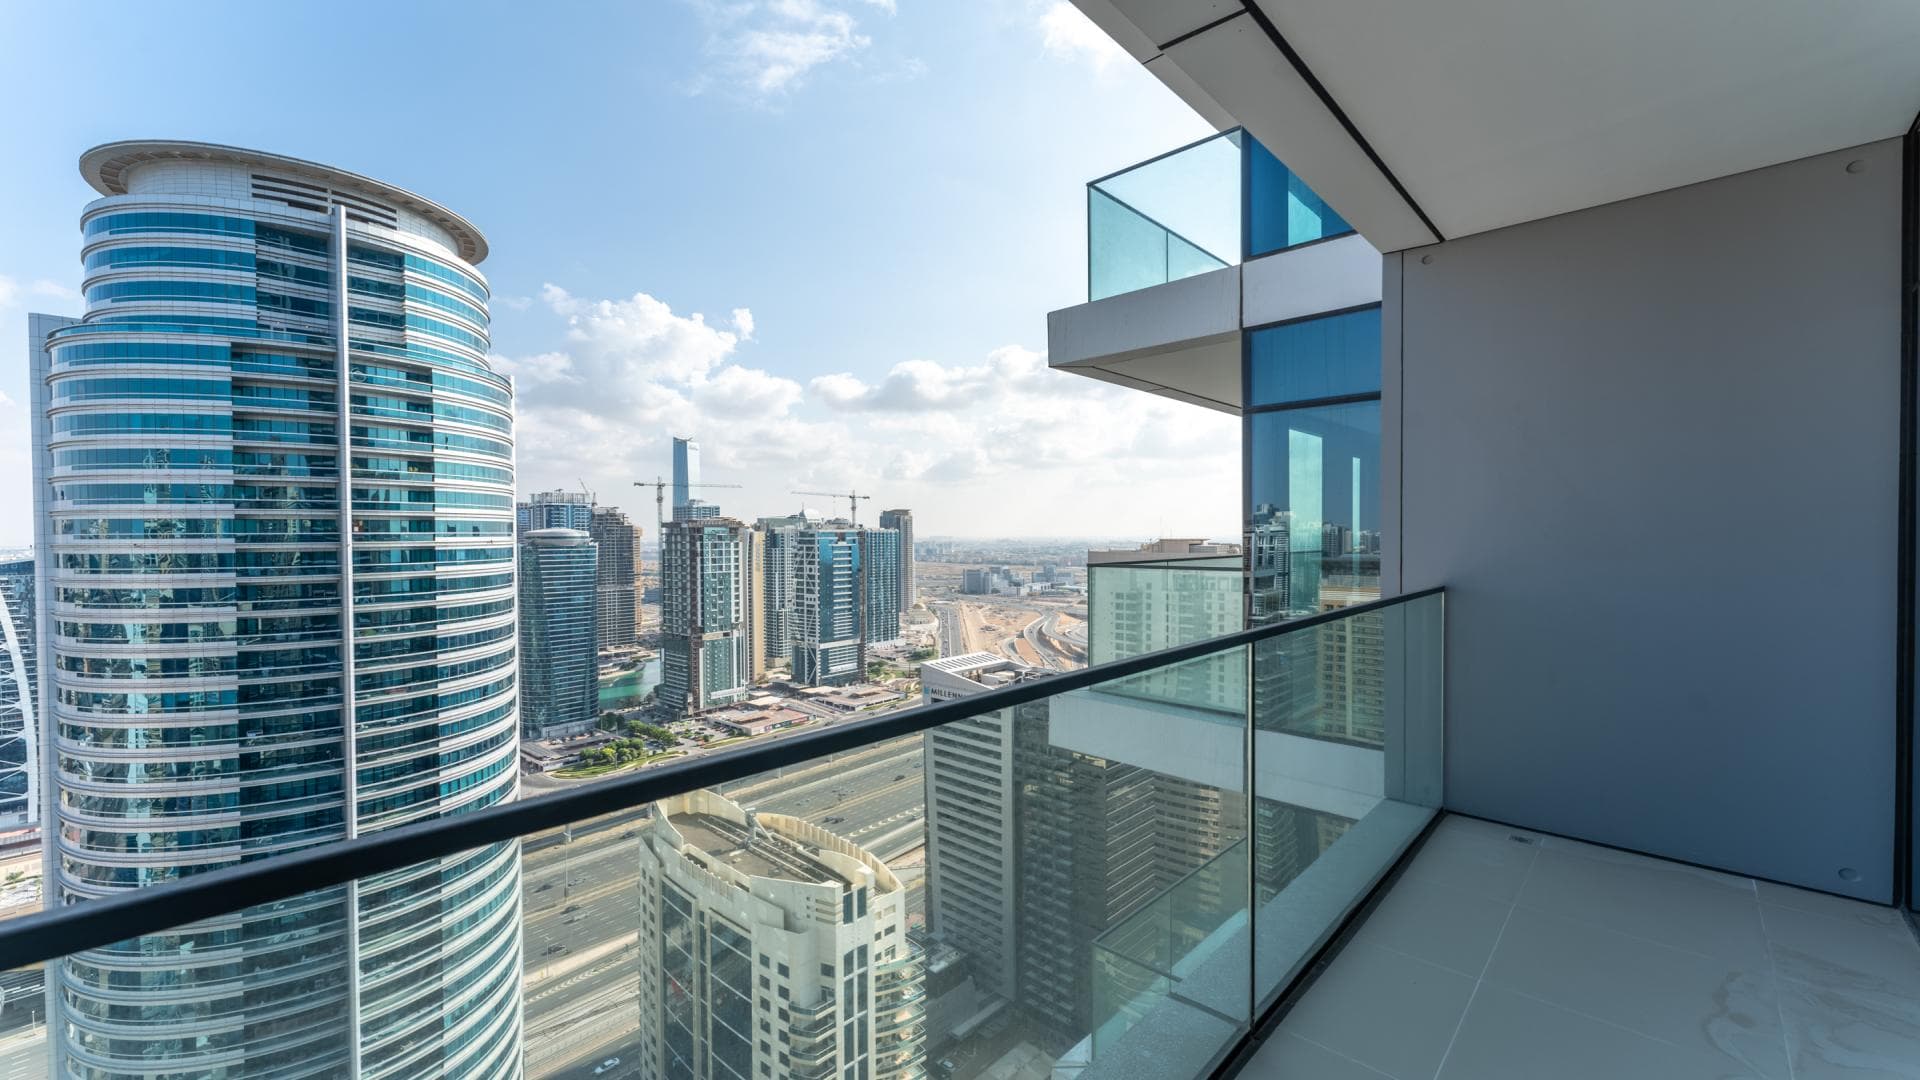 2 Bedroom Apartment For Sale Burj Place Tower 2 Lp37687 24167fcbad2fa200.jpg